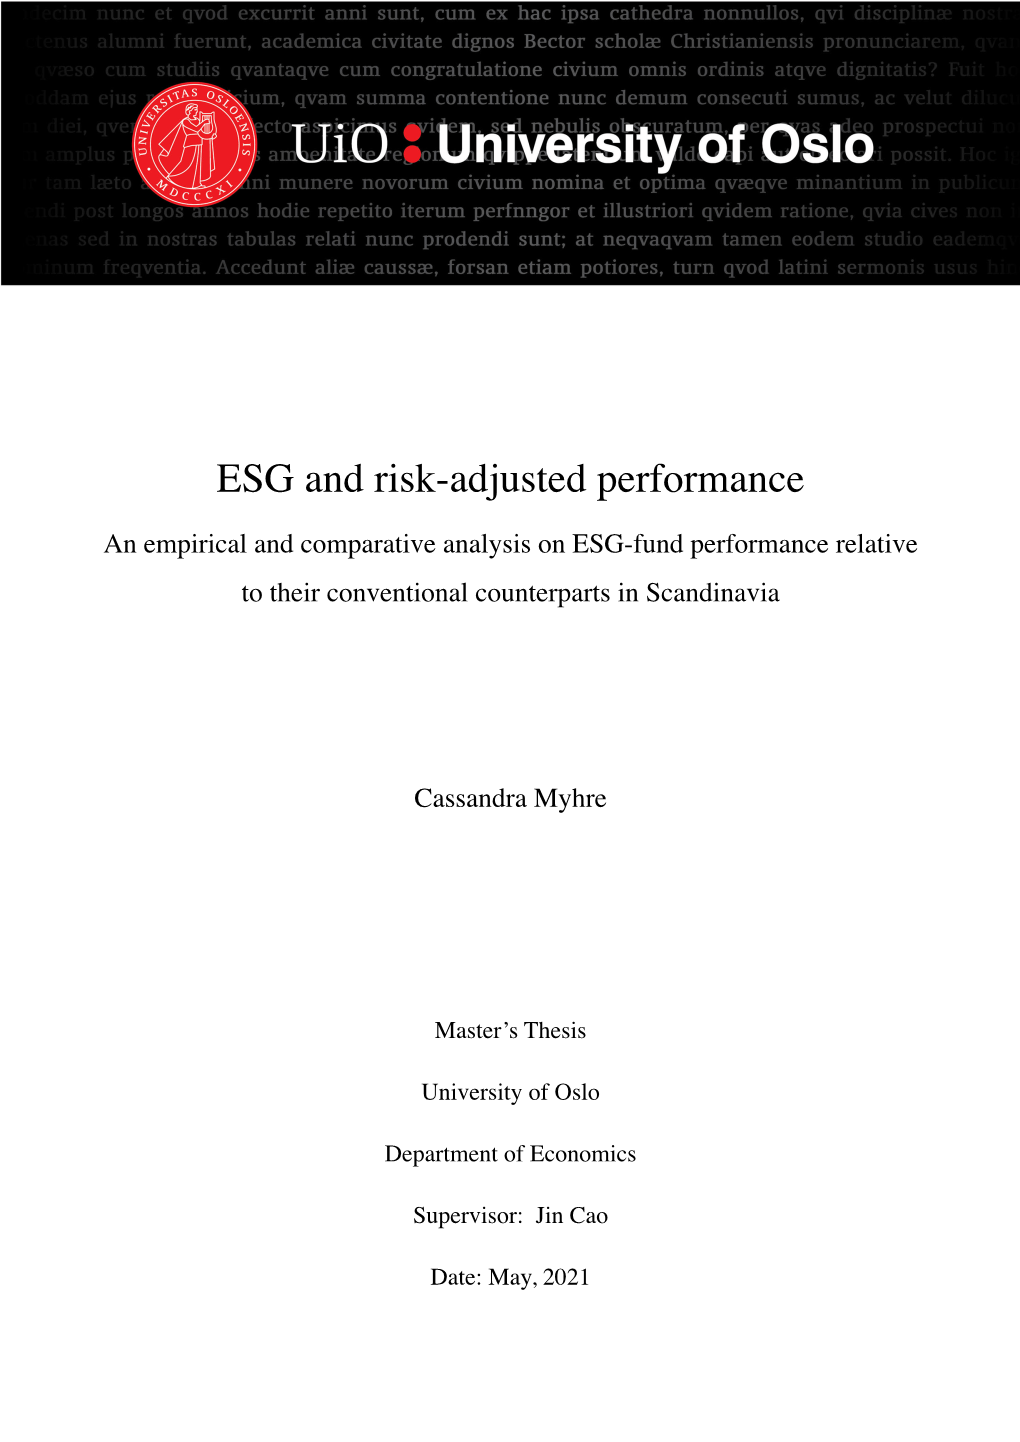 ESG and Risk-Adjusted Performance